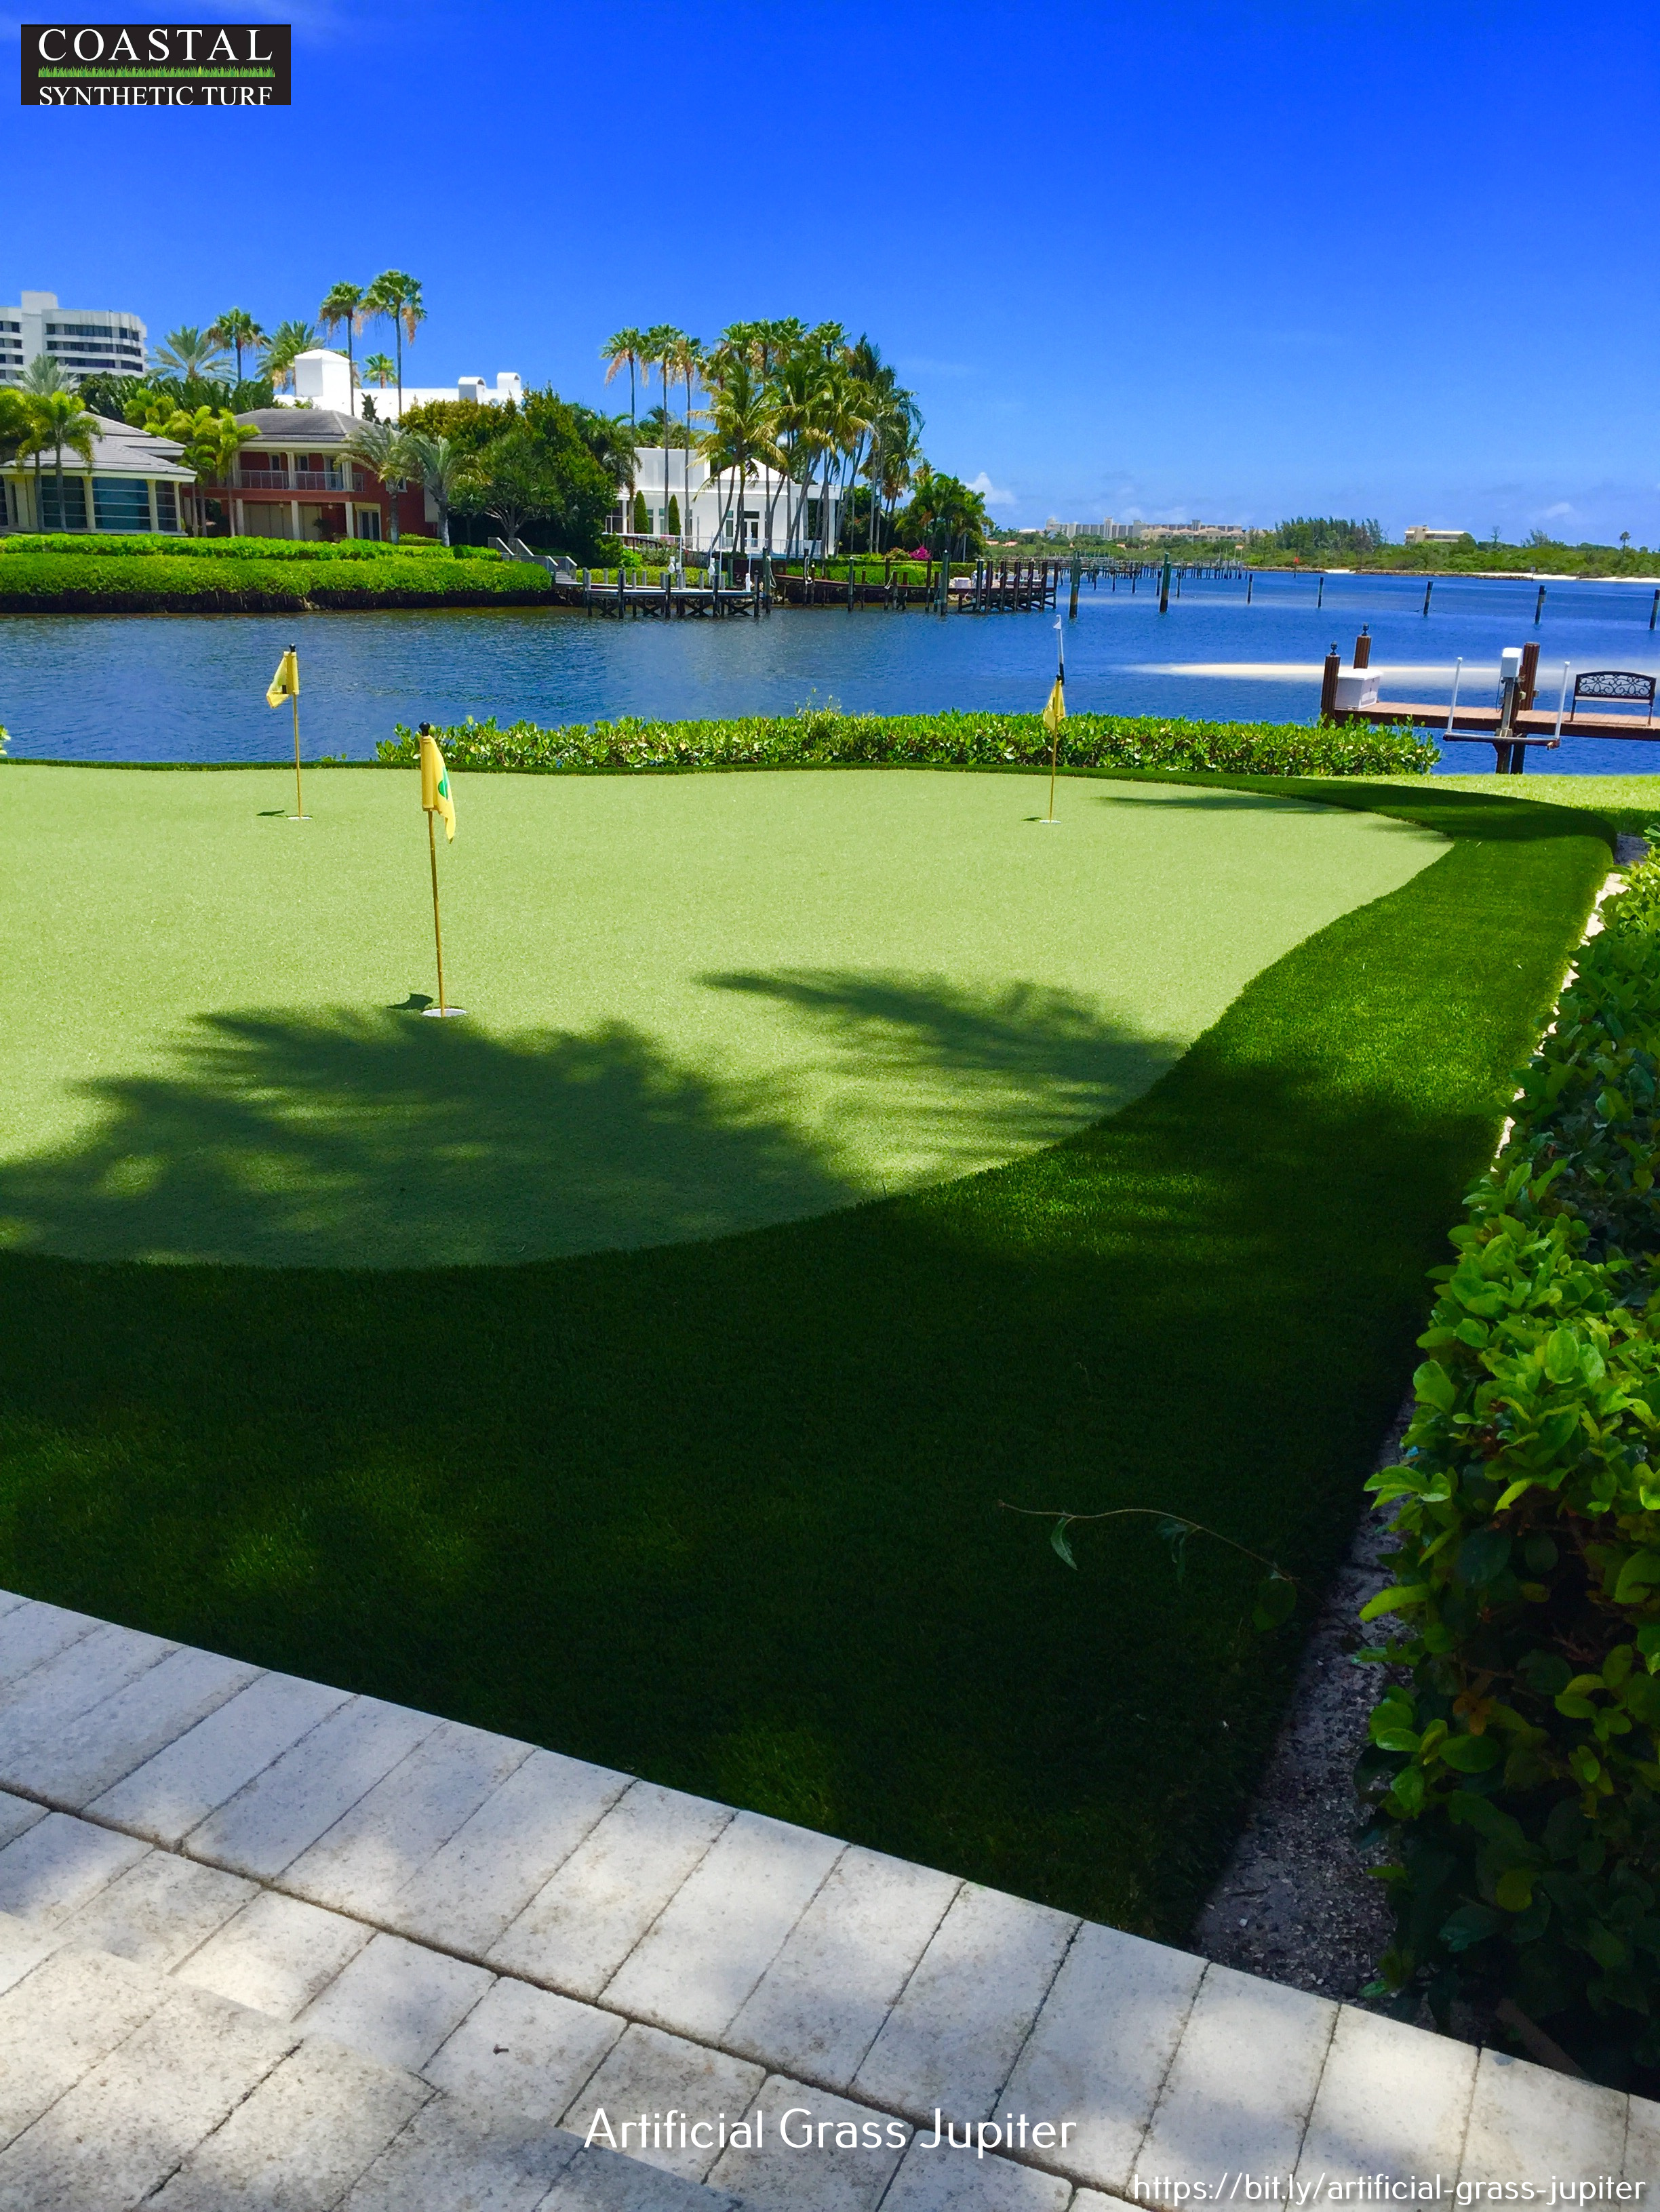 Coastal Synthetic Turf Outlines the Factors to Consider When Choosing Synthetic Turf